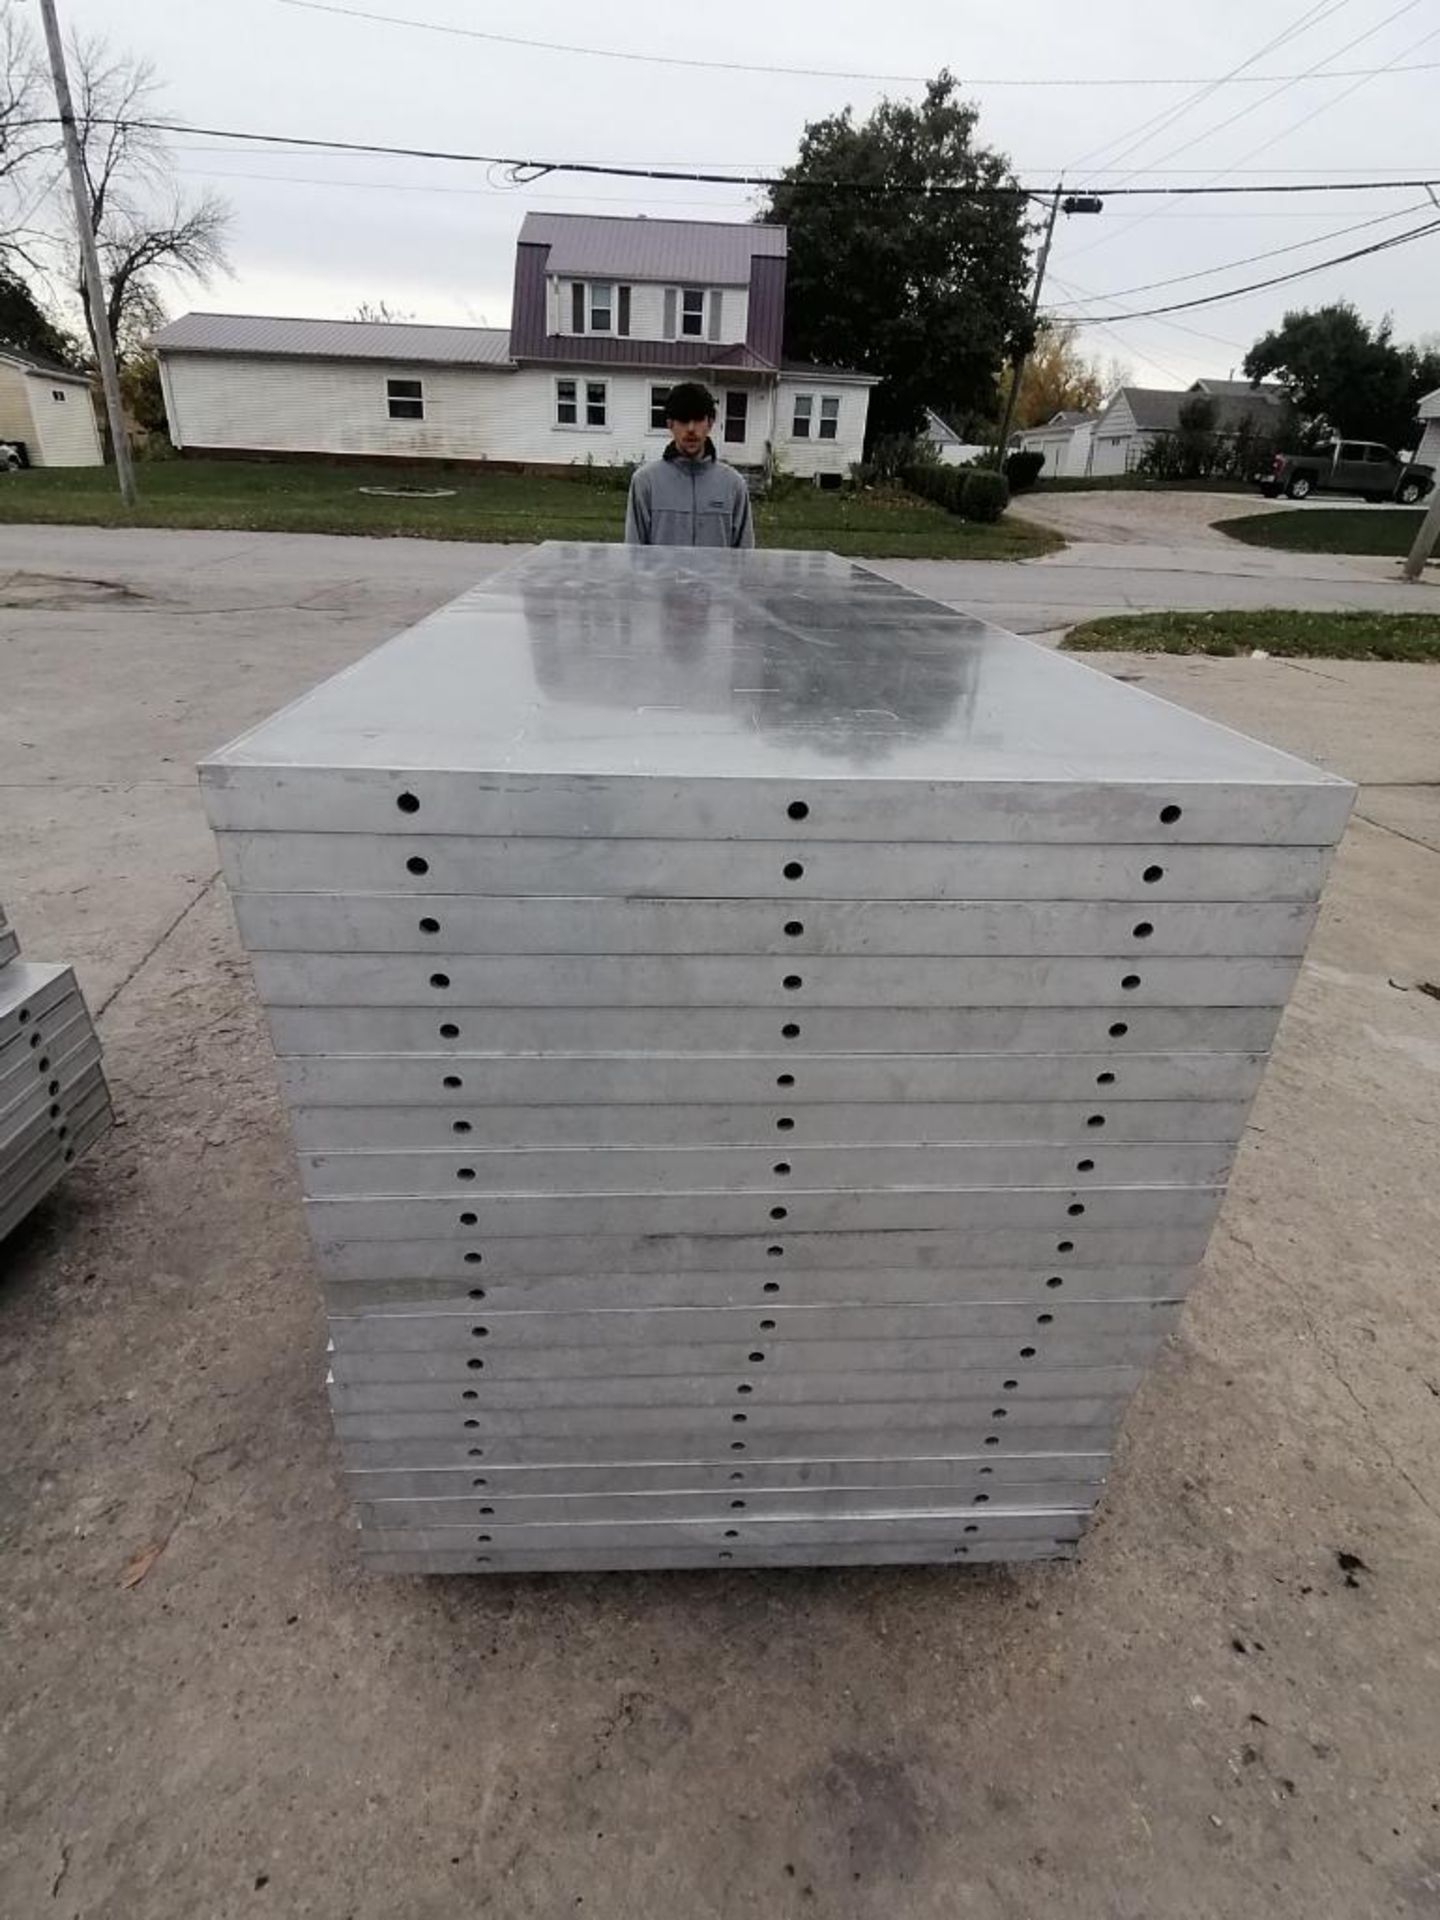 (20) 36" X 9' NEW Badger Smooth Aluminum Concrete Forms 6-12 Hole Pattern. Located in Mt. - Image 5 of 8